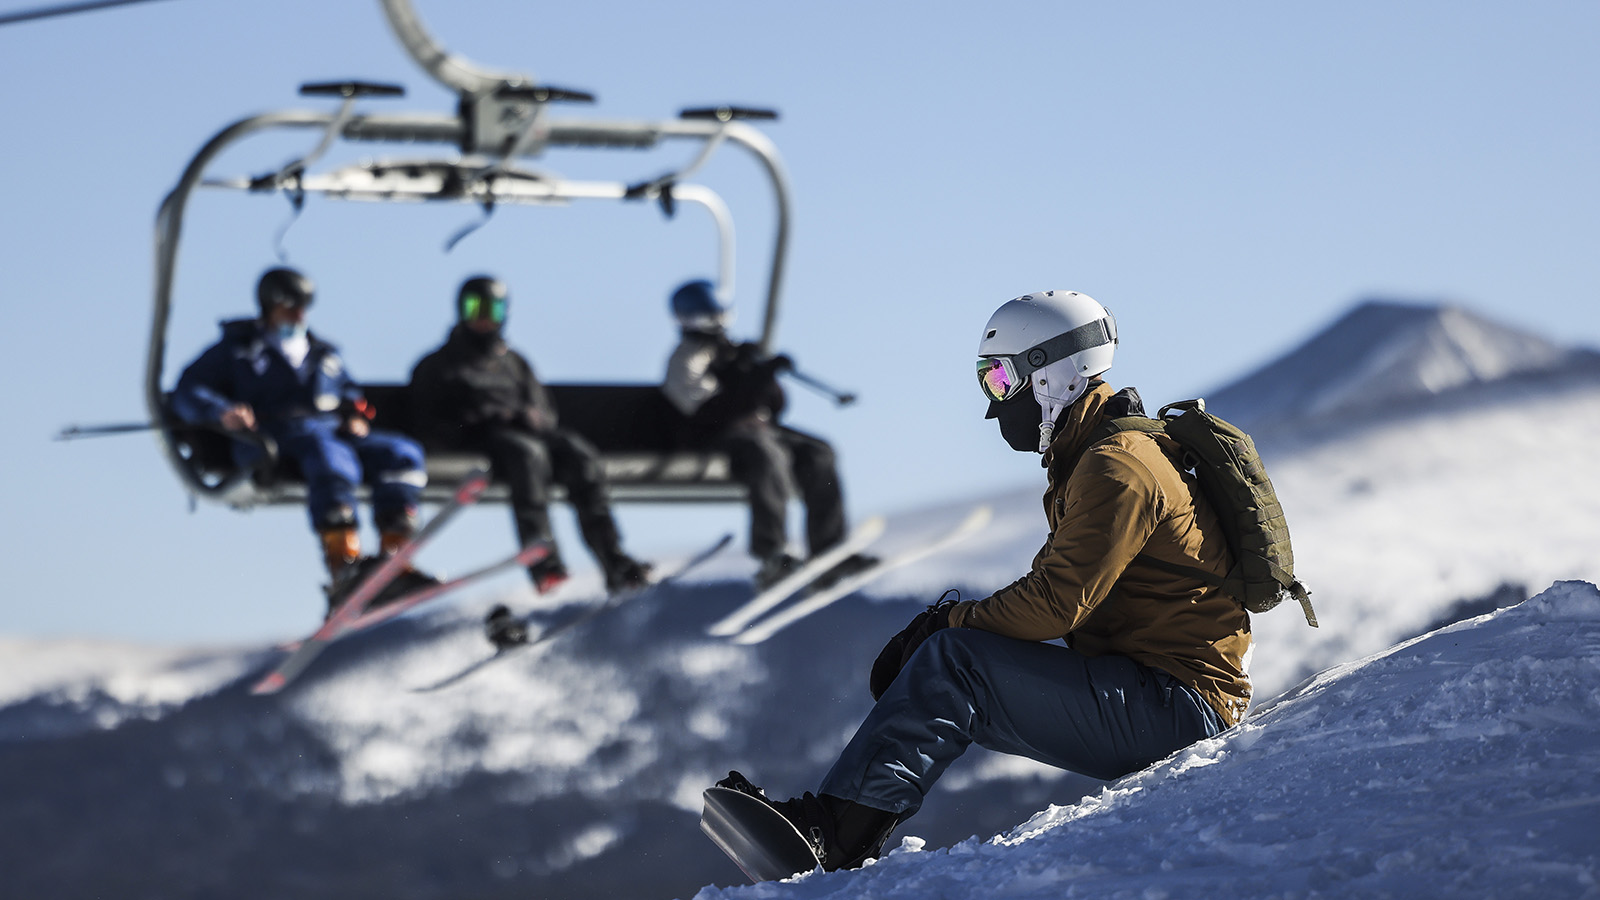 A man waits to snowboard down the mountain on opening day at Breckenridge Ski Resort on November 13, 2020.